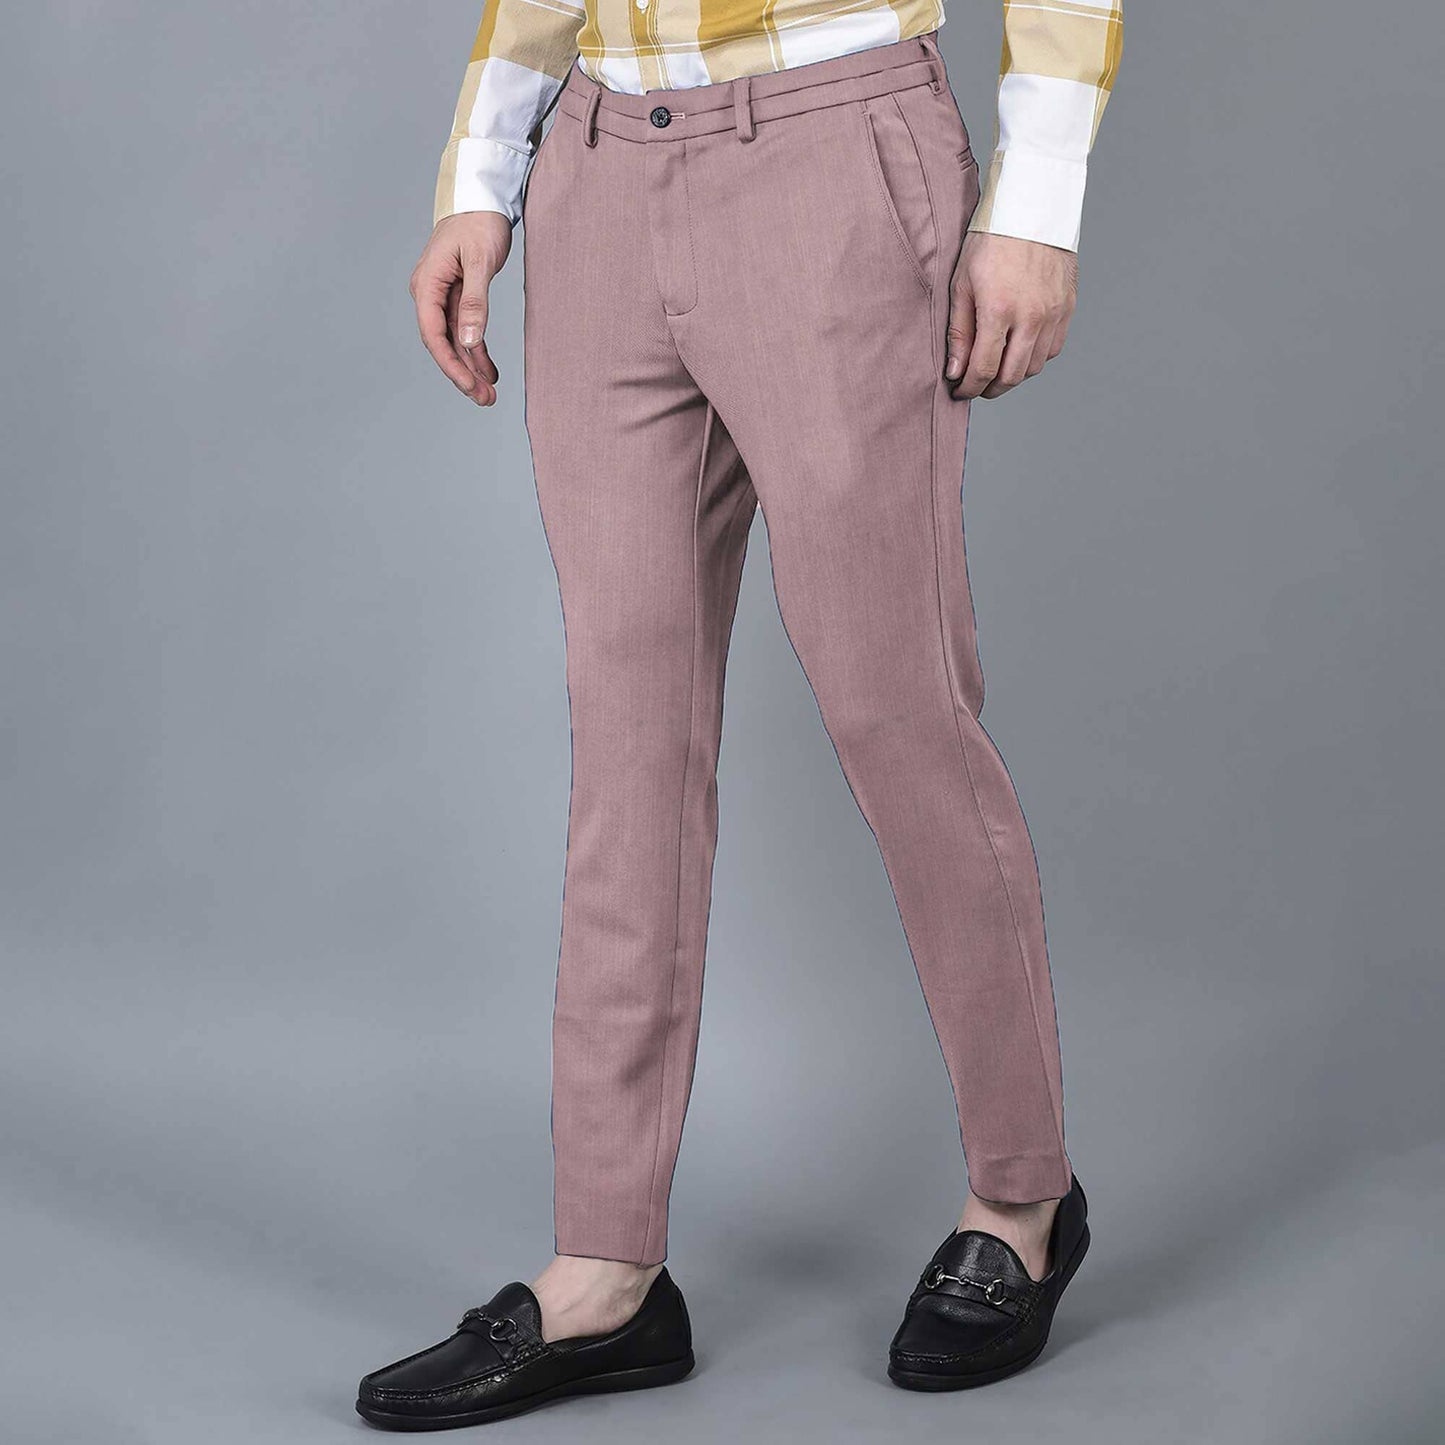 Daily Outfit Men's Slim Fit Chino Pants Men's Chino First Choice Plum 28 30